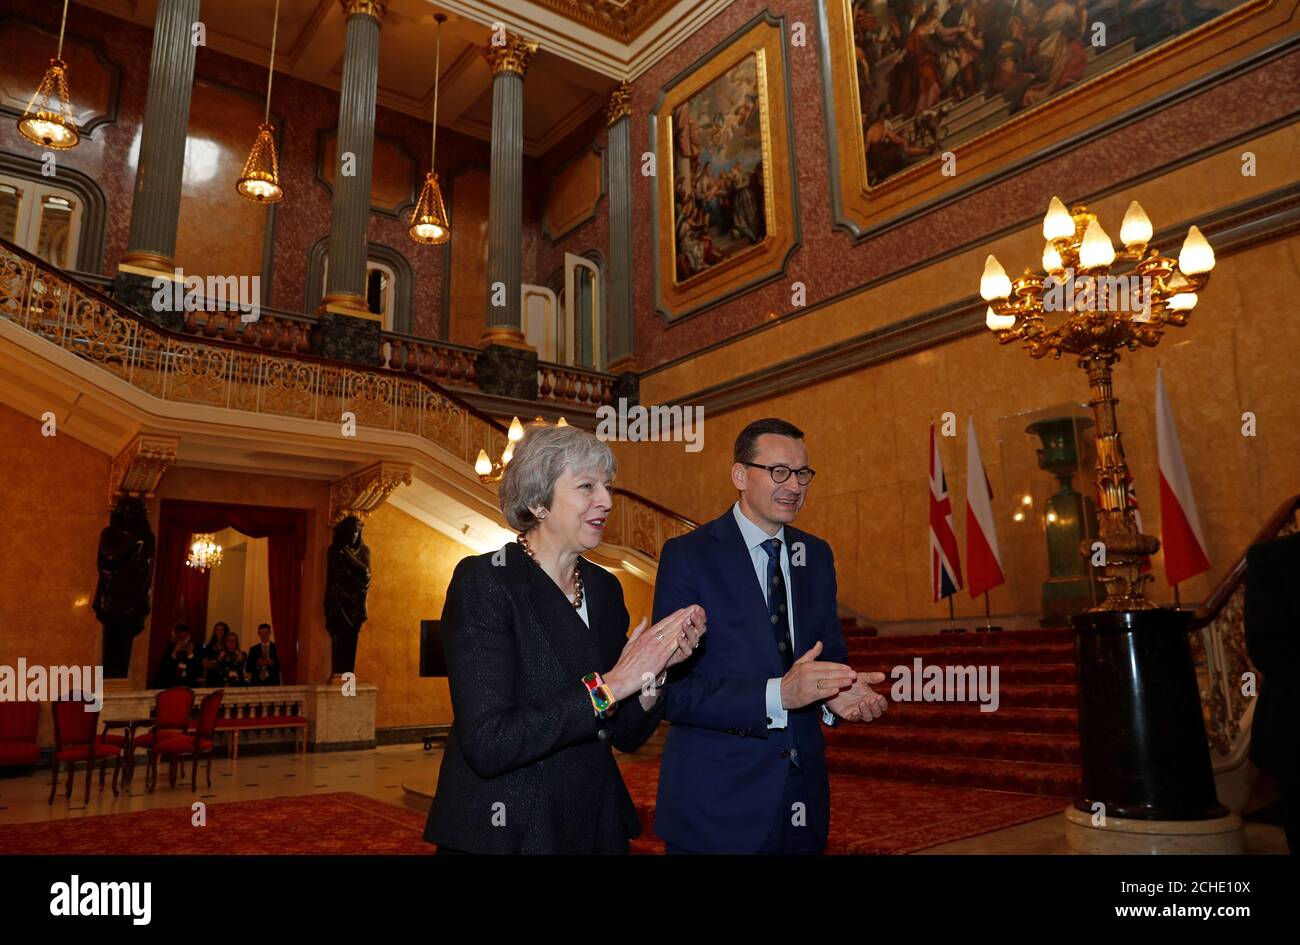 Prime Minister Theresa May and Poland's Prime Minister Mateusz Morawiecki applaud after hearing a choir sing during the UK-Poland Inter-Governmental Consultations at Lancaster House, London. Stock Photo